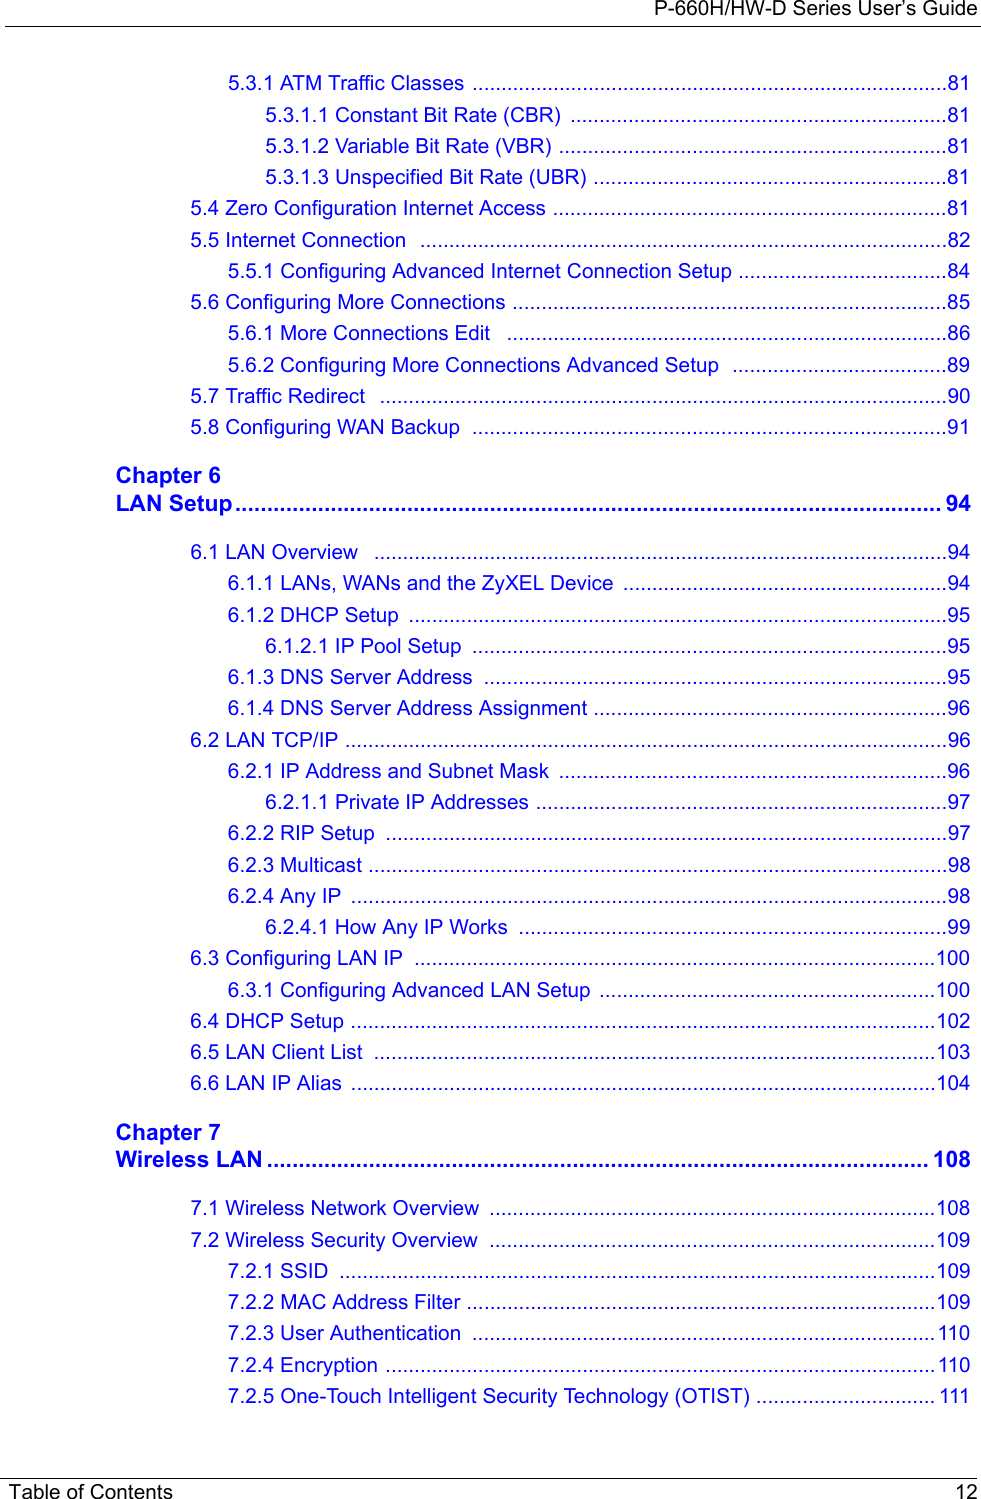 P-660H/HW-D Series User’s GuideTable of Contents 125.3.1 ATM Traffic Classes ..................................................................................815.3.1.1 Constant Bit Rate (CBR)  .................................................................815.3.1.2 Variable Bit Rate (VBR) ...................................................................815.3.1.3 Unspecified Bit Rate (UBR) .............................................................815.4 Zero Configuration Internet Access ....................................................................815.5 Internet Connection  ...........................................................................................825.5.1 Configuring Advanced Internet Connection Setup ....................................845.6 Configuring More Connections ...........................................................................855.6.1 More Connections Edit   ............................................................................865.6.2 Configuring More Connections Advanced Setup  .....................................895.7 Traffic Redirect   ..................................................................................................905.8 Configuring WAN Backup  ..................................................................................91Chapter 6LAN Setup............................................................................................................... 946.1 LAN Overview   ...................................................................................................946.1.1 LANs, WANs and the ZyXEL Device  ........................................................946.1.2 DHCP Setup  .............................................................................................956.1.2.1 IP Pool Setup  ..................................................................................956.1.3 DNS Server Address  ................................................................................956.1.4 DNS Server Address Assignment .............................................................966.2 LAN TCP/IP ........................................................................................................966.2.1 IP Address and Subnet Mask  ...................................................................966.2.1.1 Private IP Addresses .......................................................................976.2.2 RIP Setup  .................................................................................................976.2.3 Multicast ....................................................................................................986.2.4 Any IP  .......................................................................................................986.2.4.1 How Any IP Works  ..........................................................................996.3 Configuring LAN IP  ..........................................................................................1006.3.1 Configuring Advanced LAN Setup  ..........................................................1006.4 DHCP Setup .....................................................................................................1026.5 LAN Client List  .................................................................................................1036.6 LAN IP Alias  .....................................................................................................104Chapter 7Wireless LAN ........................................................................................................ 1087.1 Wireless Network Overview  .............................................................................1087.2 Wireless Security Overview  .............................................................................1097.2.1 SSID  .......................................................................................................1097.2.2 MAC Address Filter .................................................................................1097.2.3 User Authentication  ................................................................................1107.2.4 Encryption ...............................................................................................1107.2.5 One-Touch Intelligent Security Technology (OTIST) ............................... 111